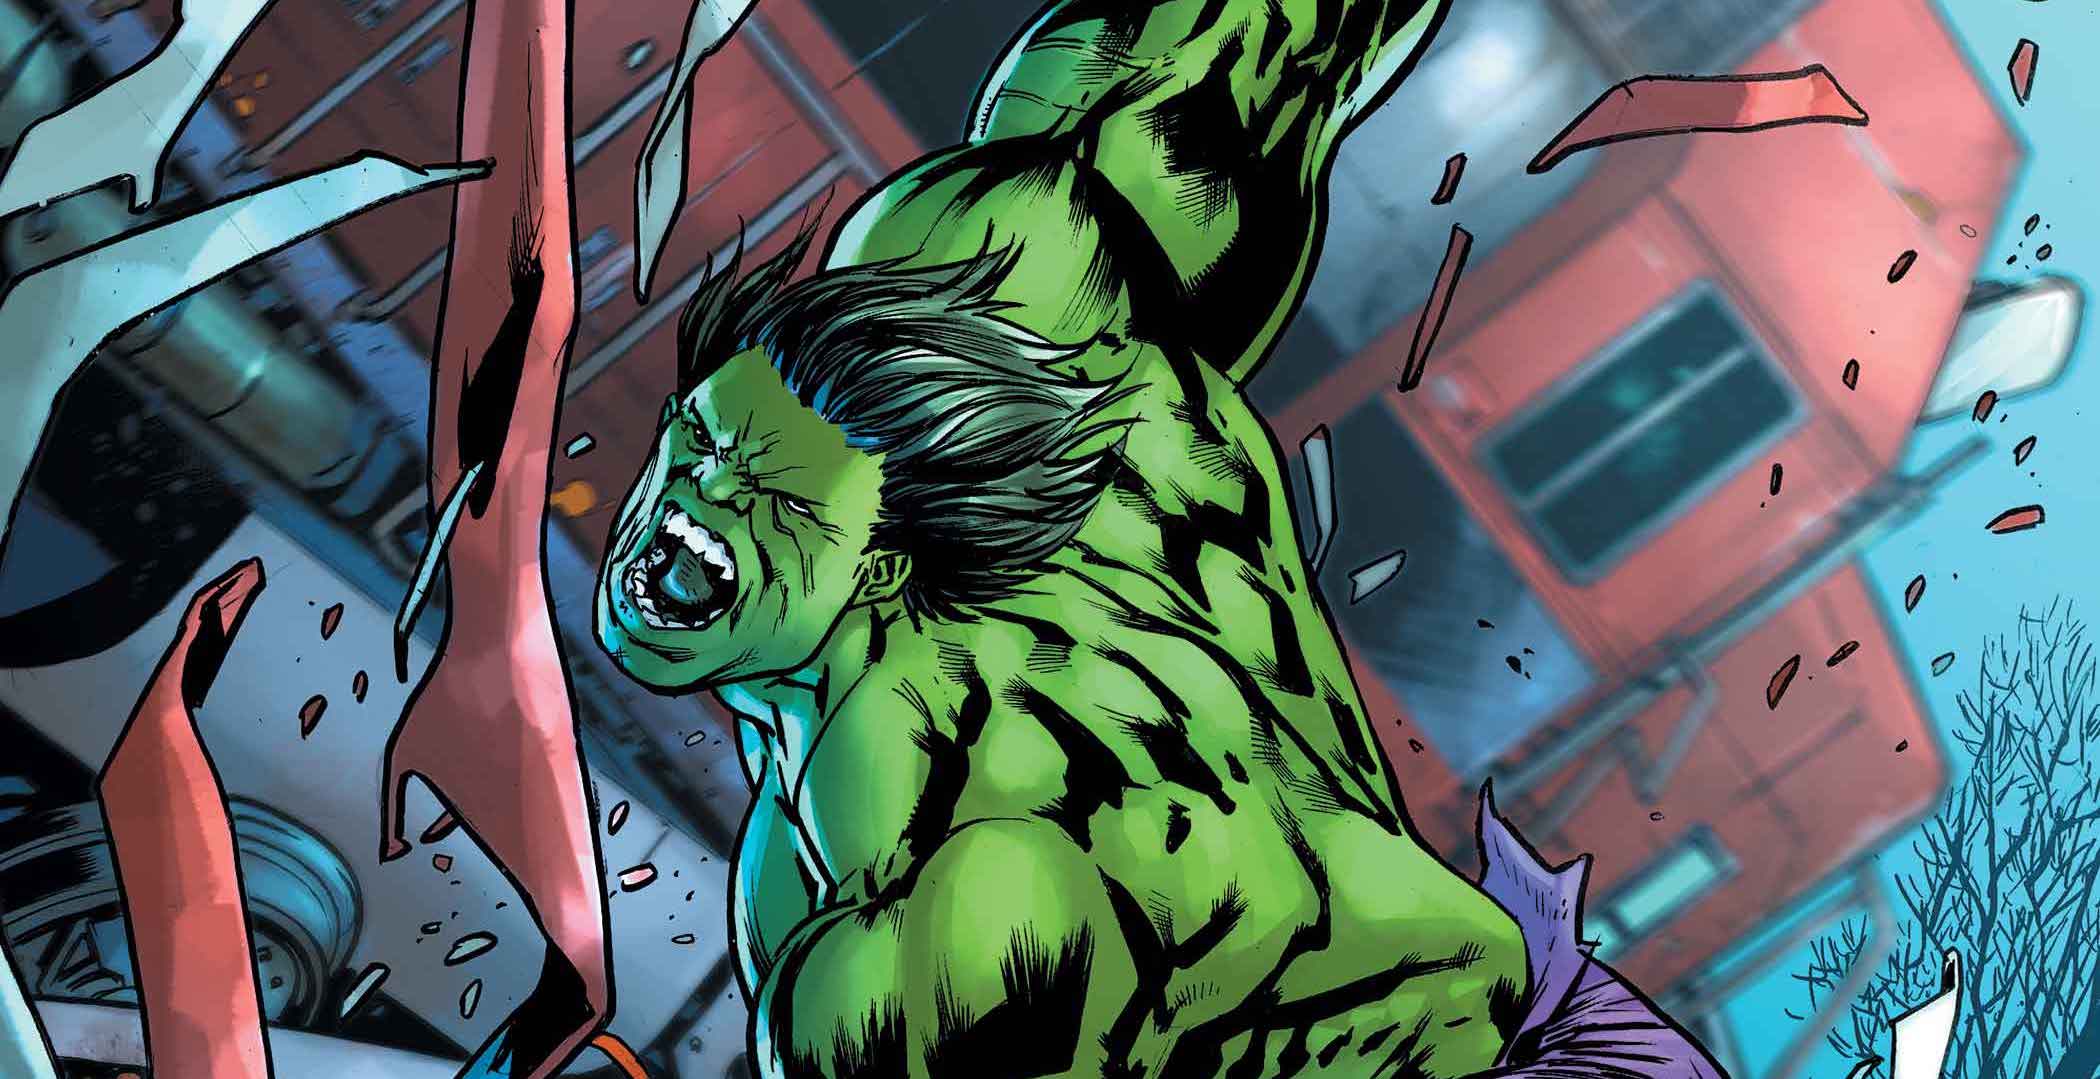 'Giant-Size' anniversary continues with 'Giant-Size Hulk' #1 in April